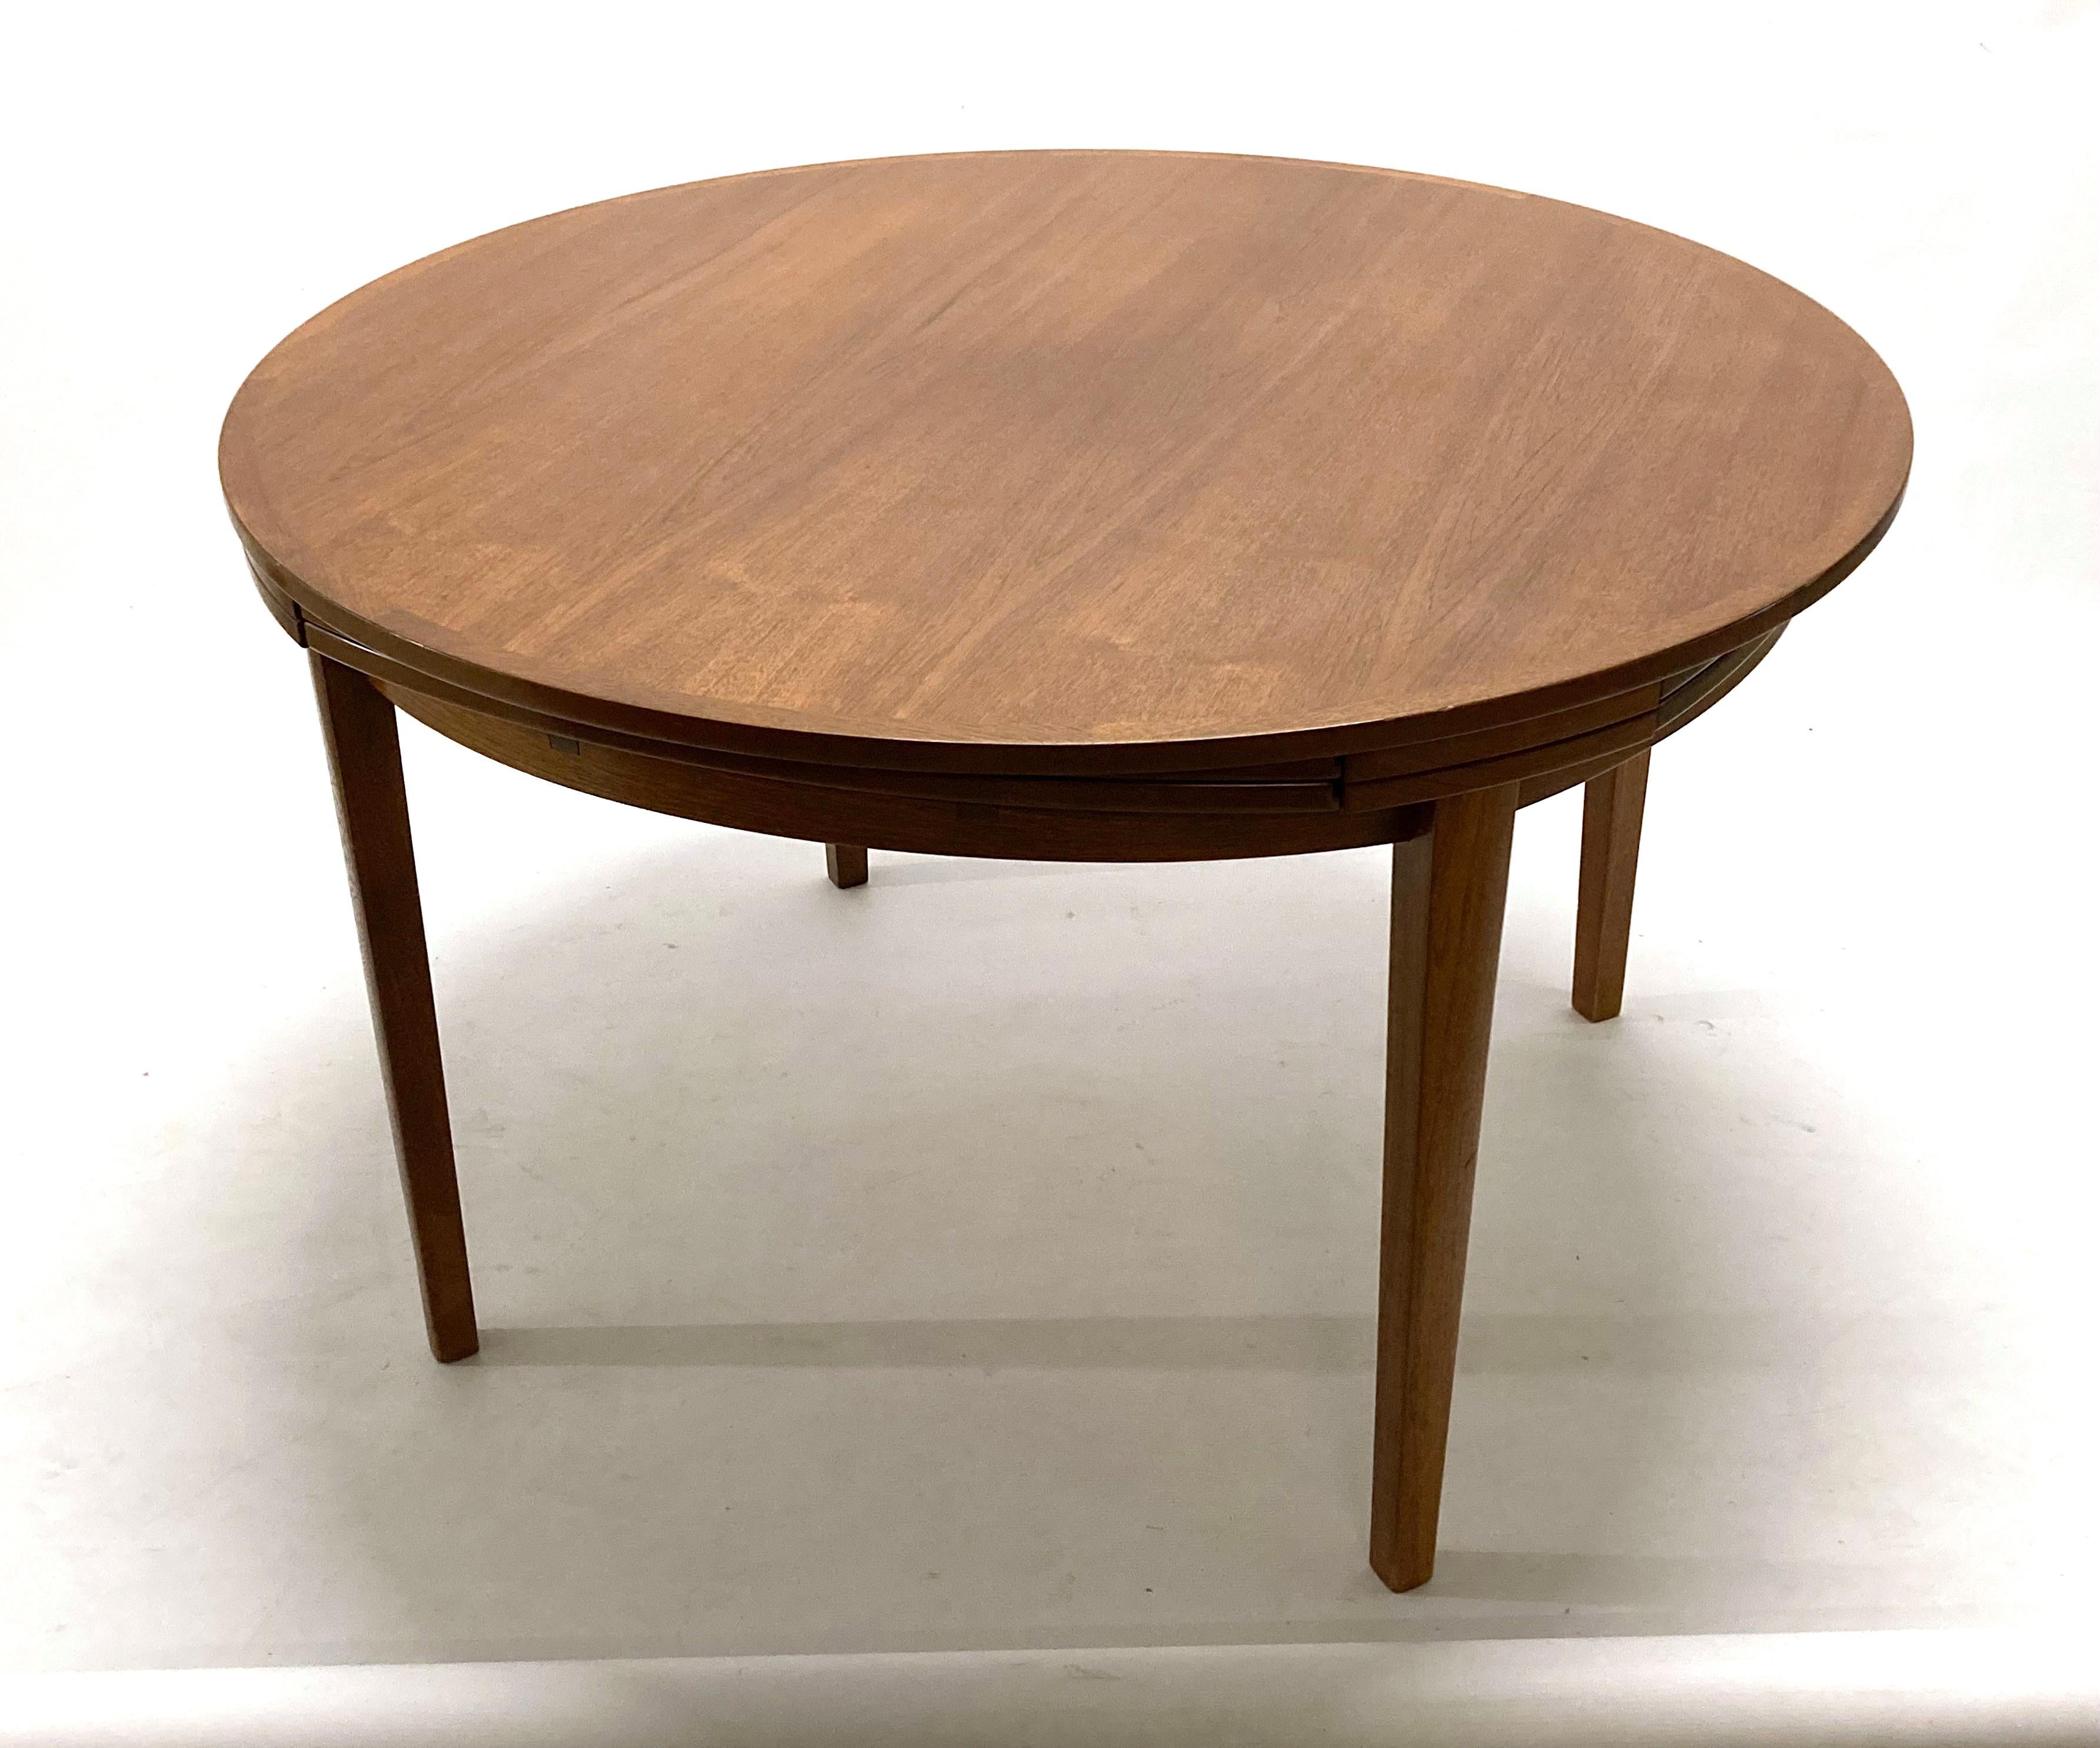 Danish Dyrlund teak Flip Flap Lotus dining table, circa 1965. With solid teak edge banding.

This table sits 4 comfortably for everyday use, and 8 when extended. There are 4 pull out folding leaves that fit under the table and slide out and flip